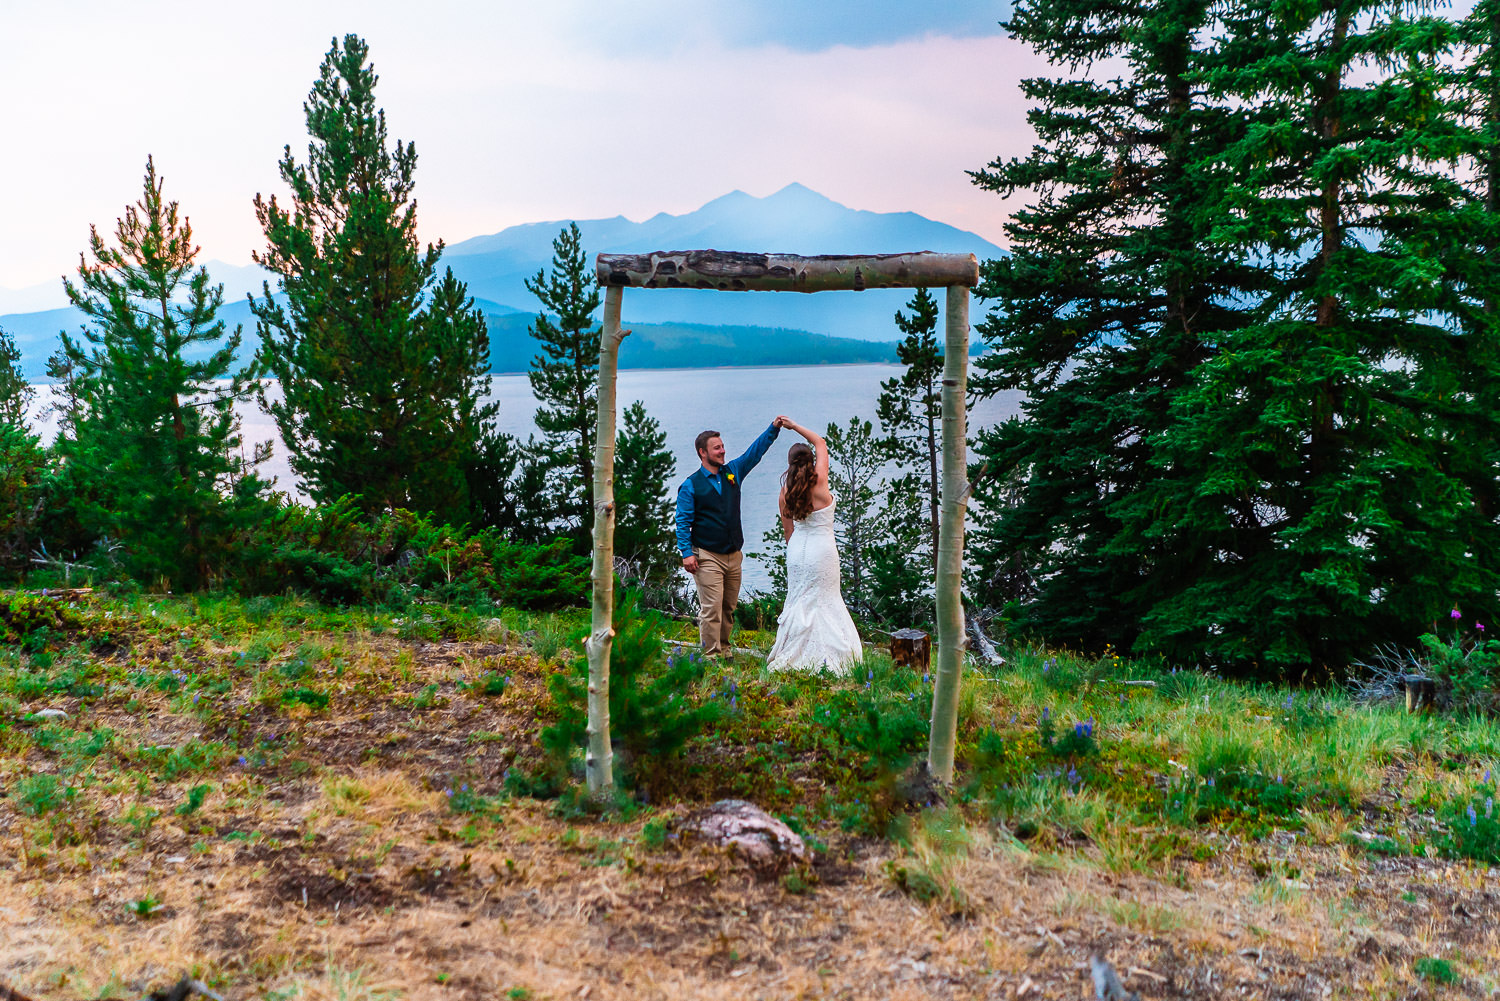 A couple in wedding attire holding hands and dancing under a rustic wooden frame with the mountainous landscape of Lake Dillon in the background, celebrating during their Windy Point Campground wedding.